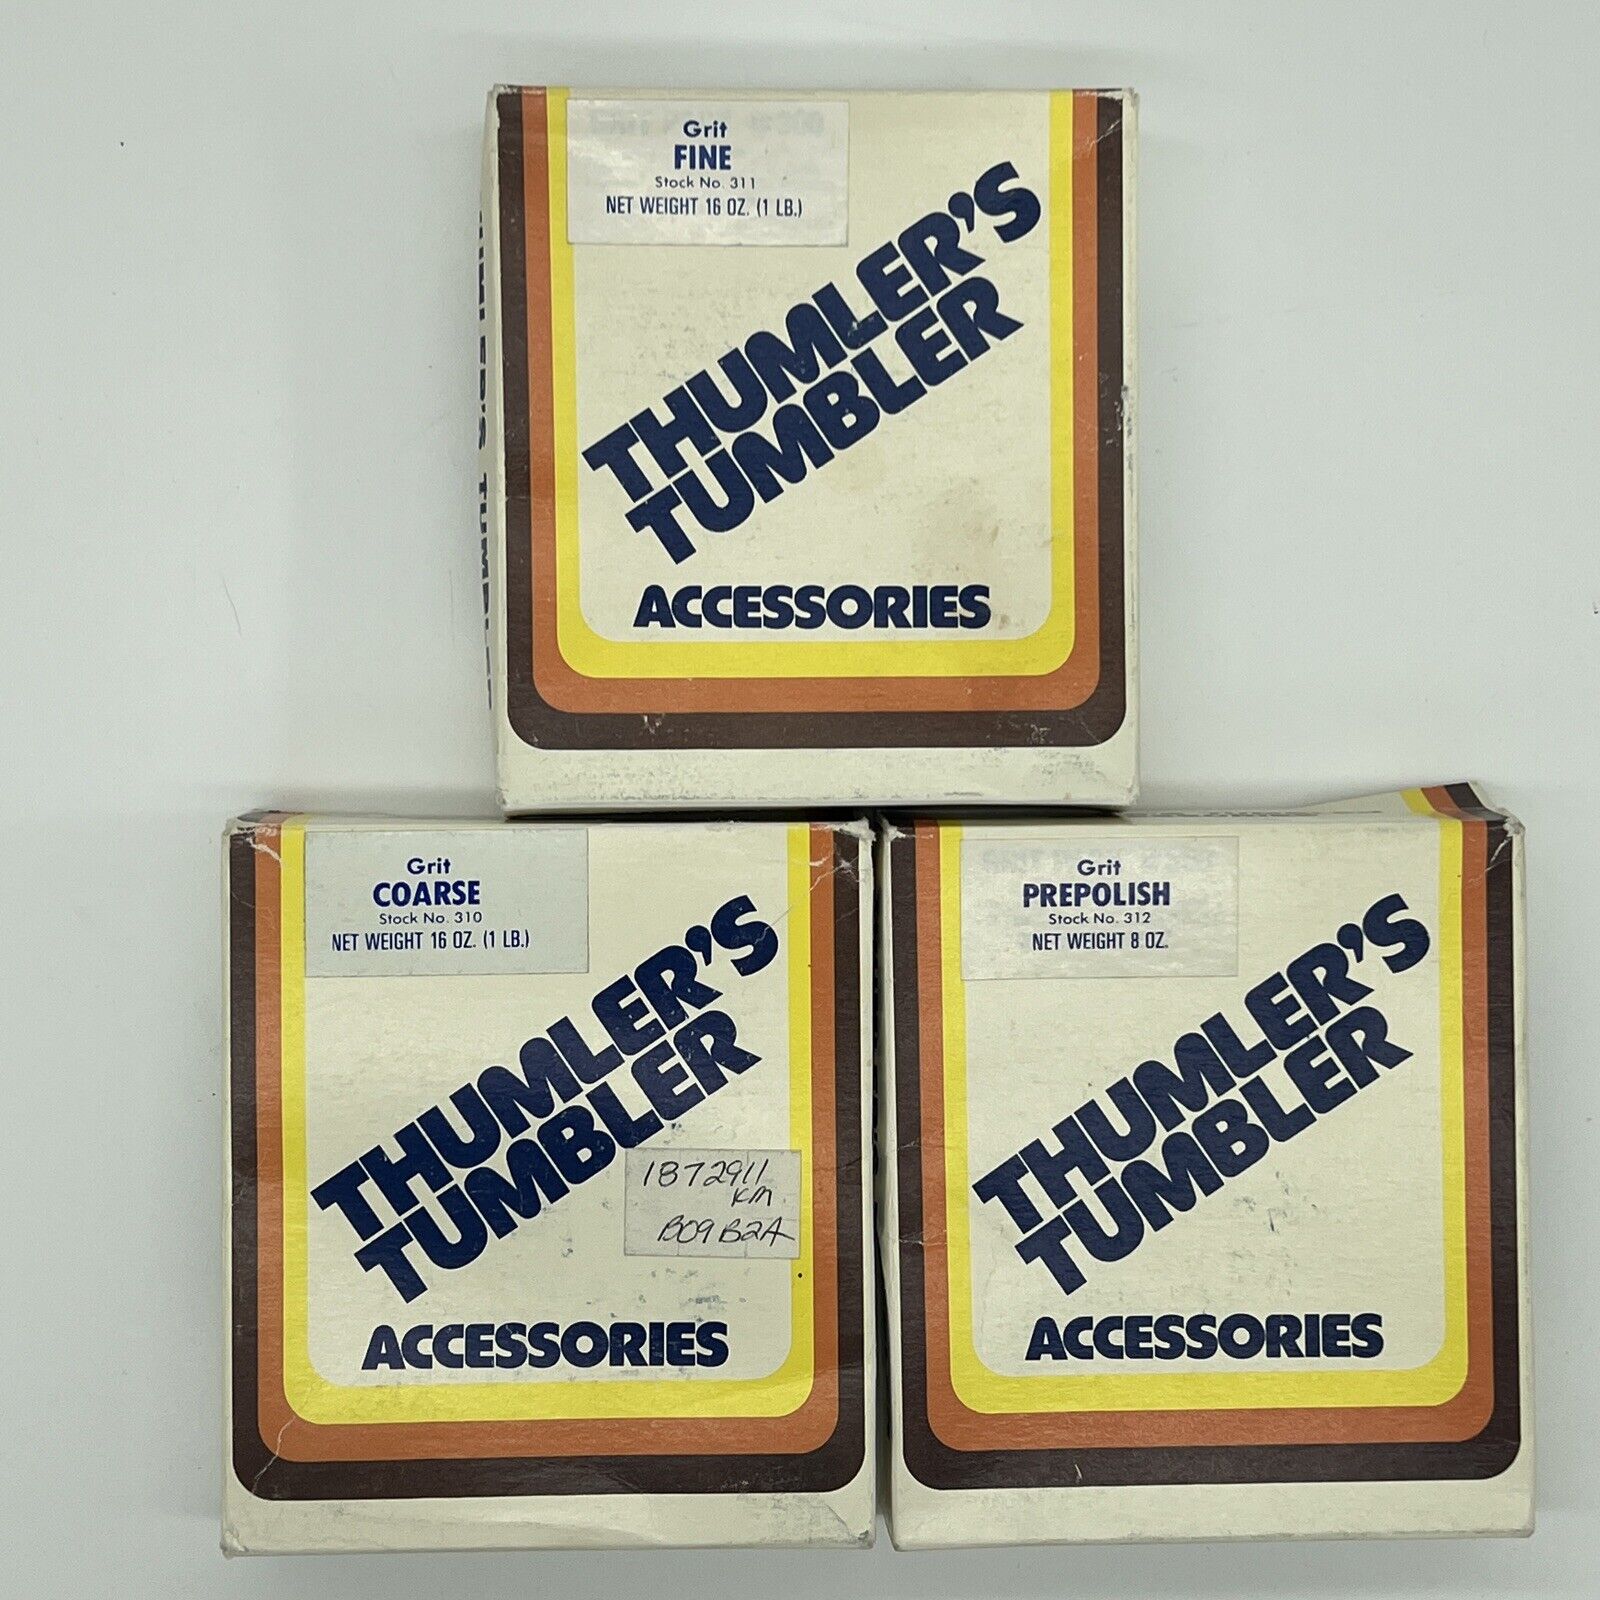 Lot Of 3 VtG Boxes Thumlers Tumbler Grit Packs 311 312 310 Unopened Accessories 